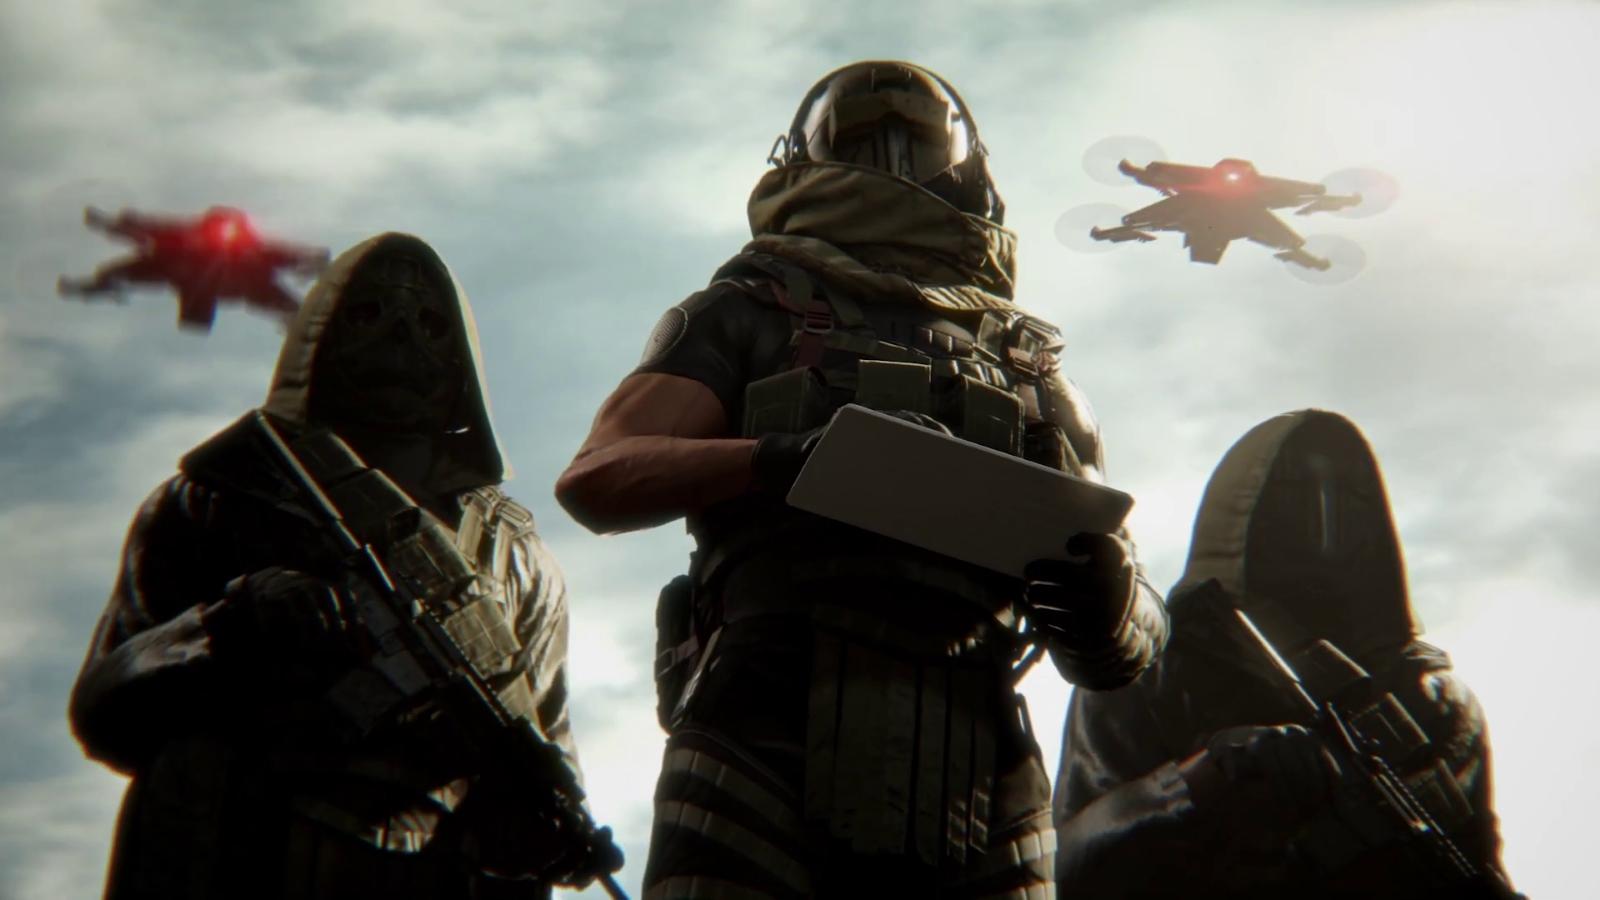 E3 2019: 'Ghost Recon: Breakpoint' Shows Stadia Could Revolutionize